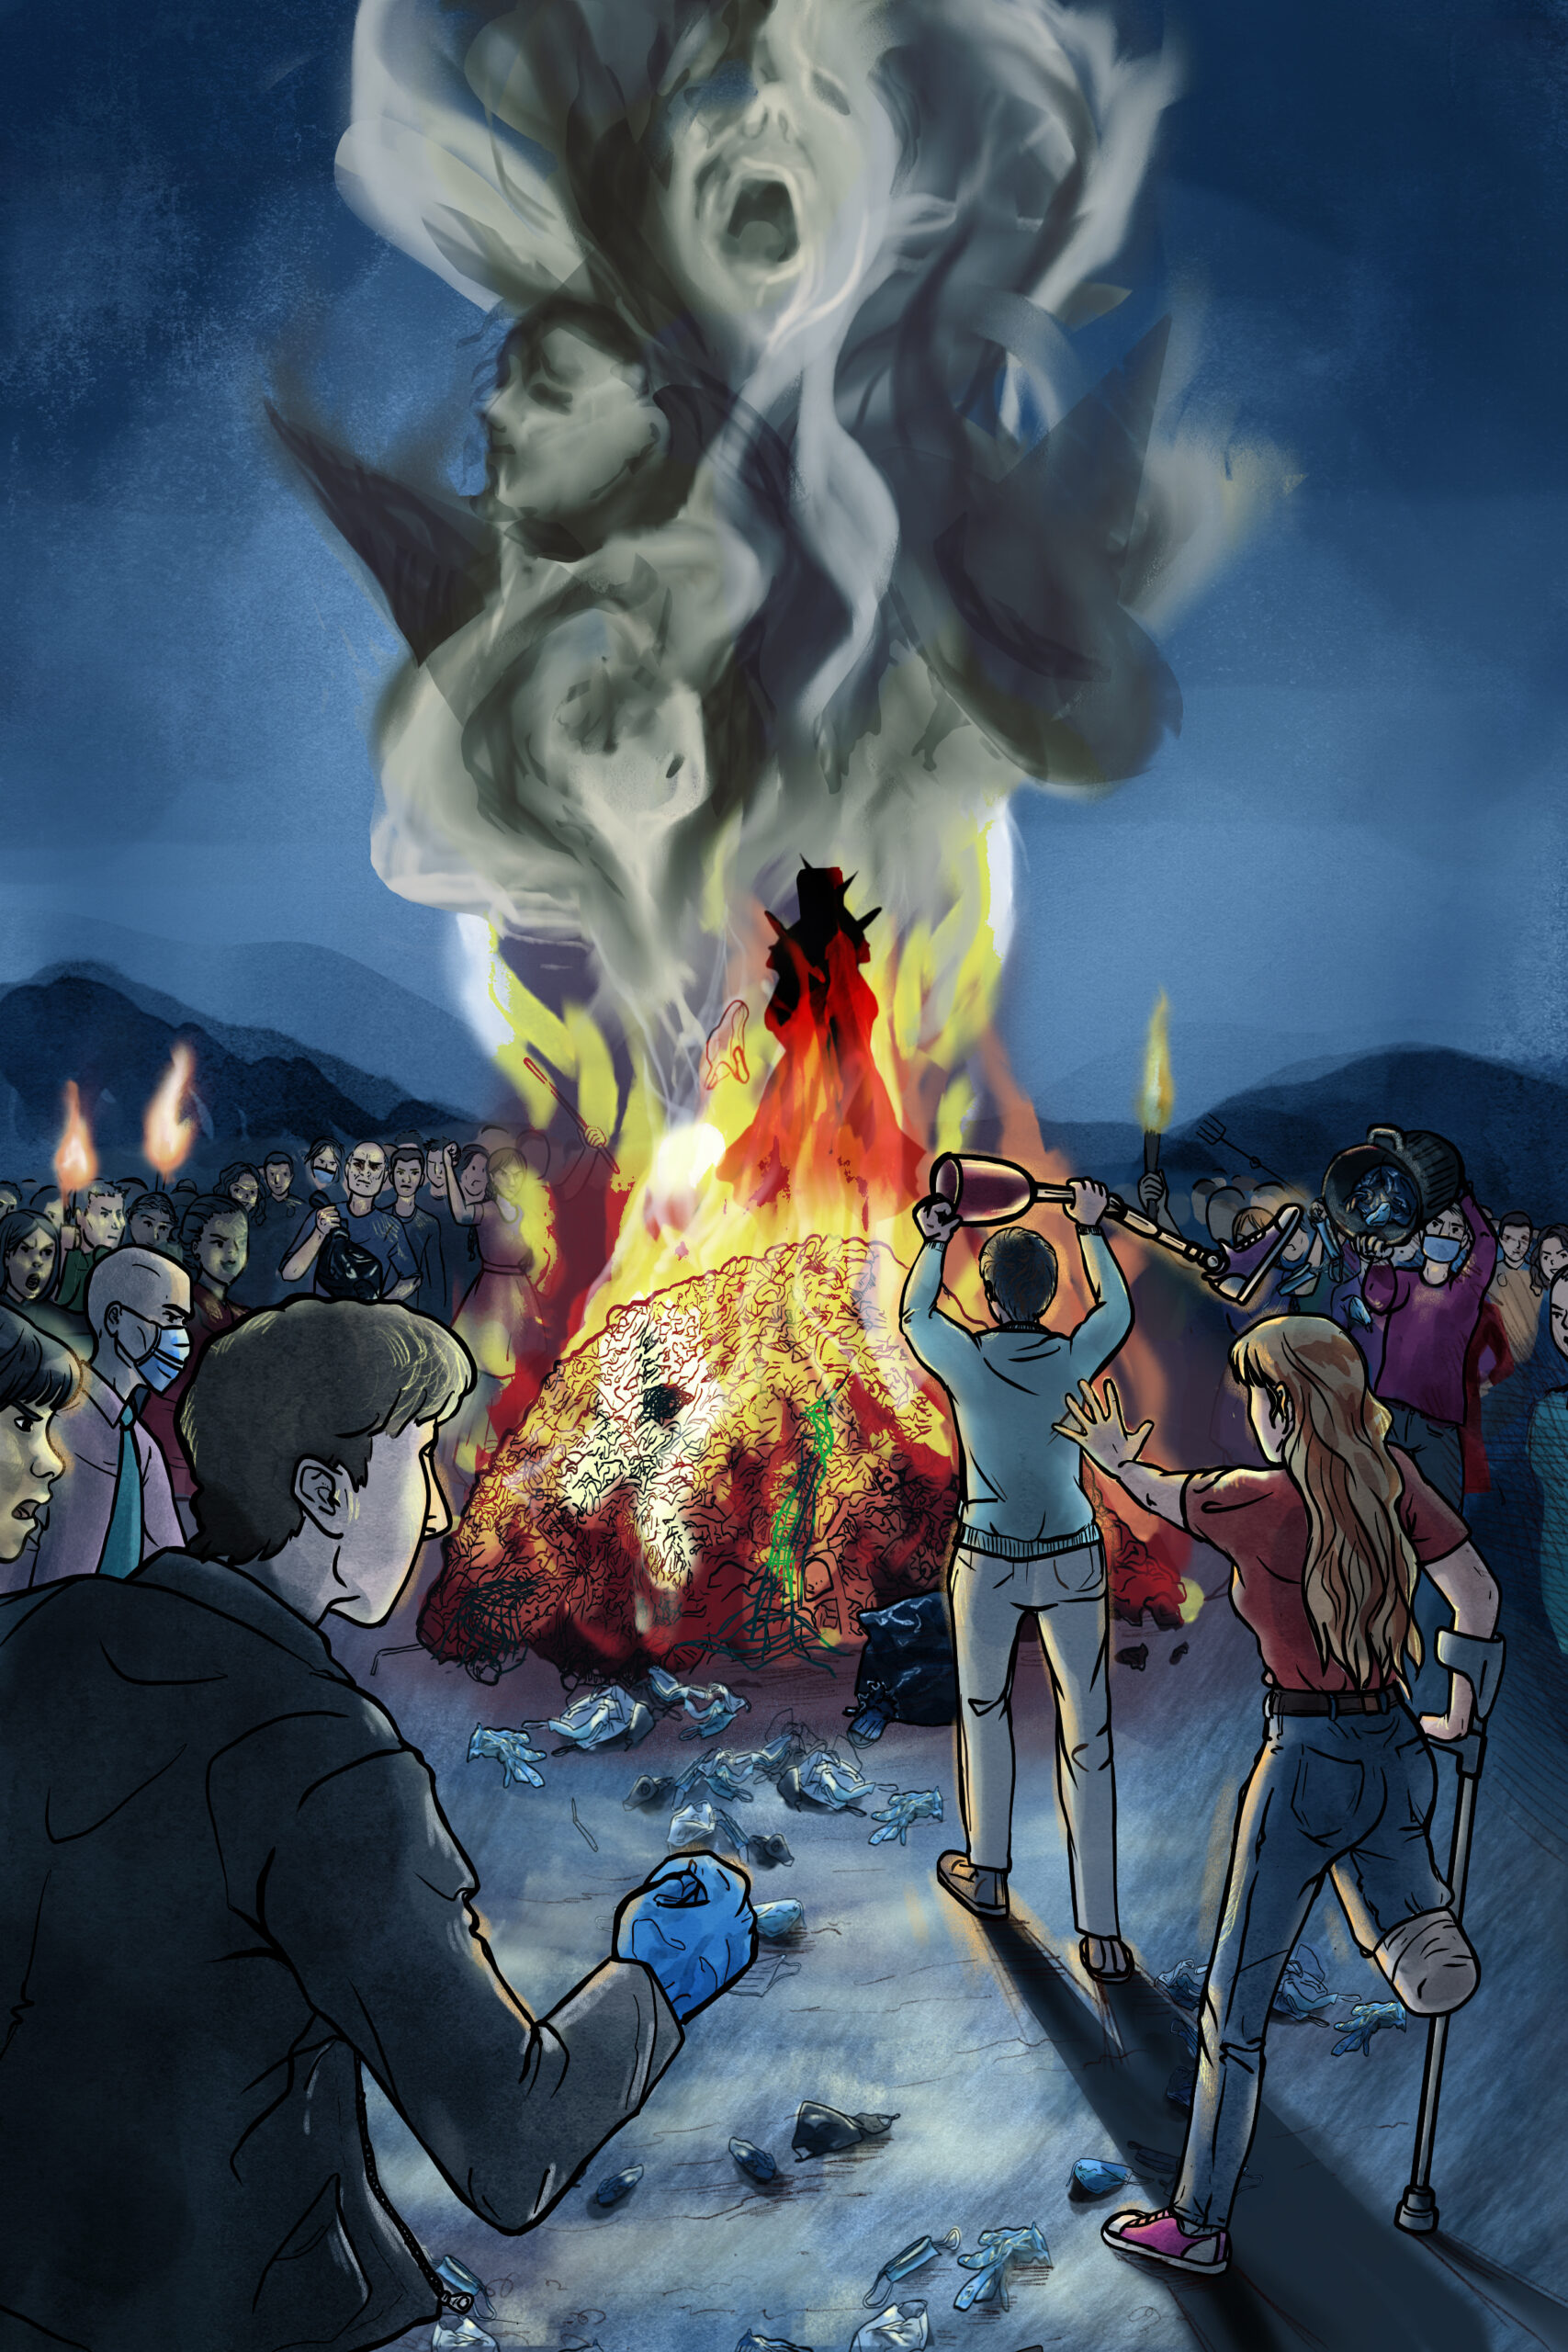 mountains of plastics, crowd with torches, plastic being burnt, witches being burnt, witch hunt